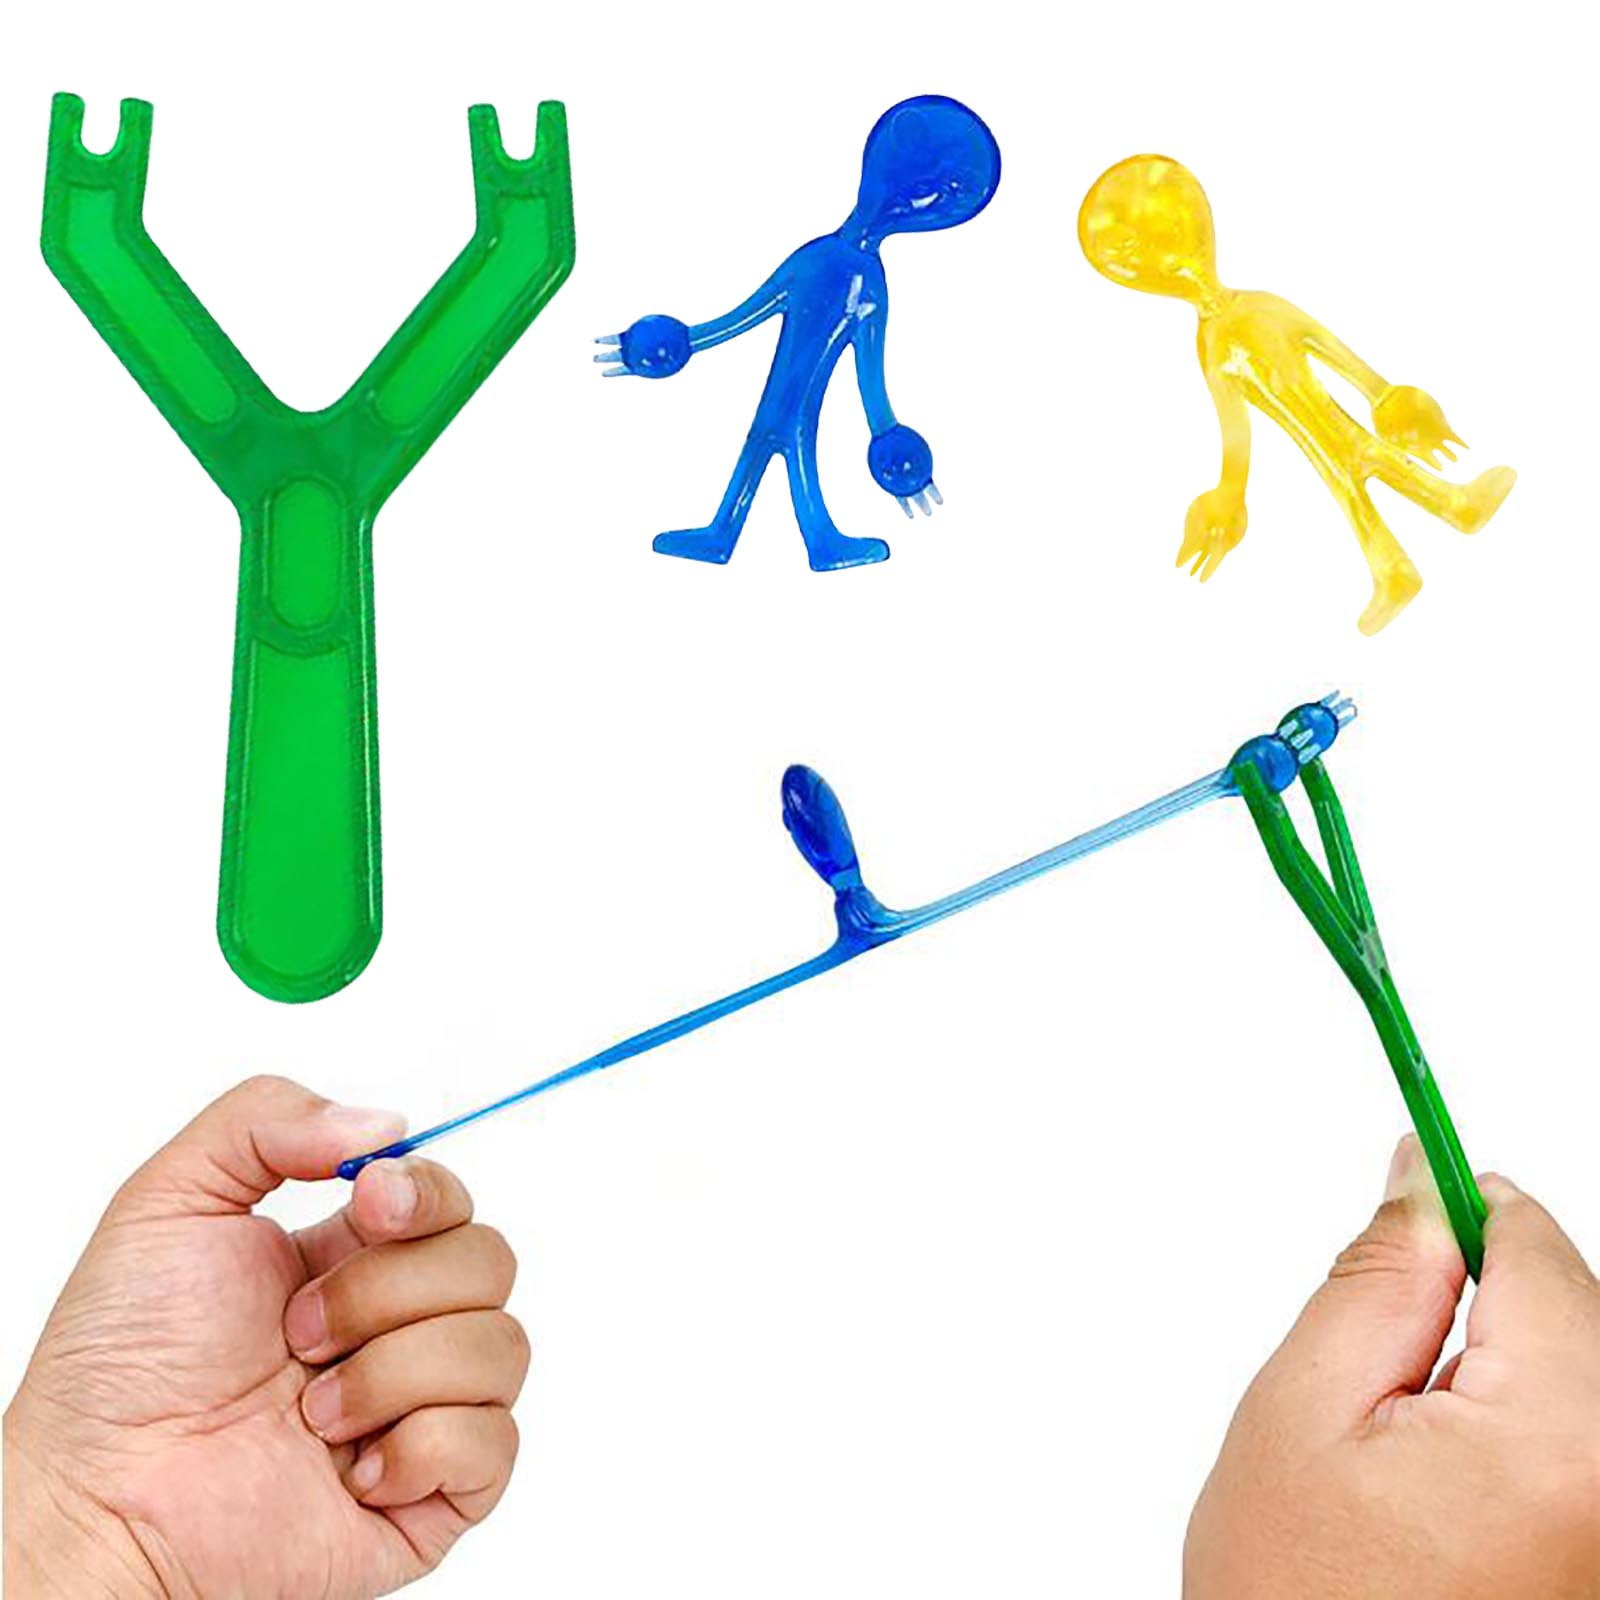 1x Wall Walker Sticky Toy Fun Game For Kids,a Xmas Gift 